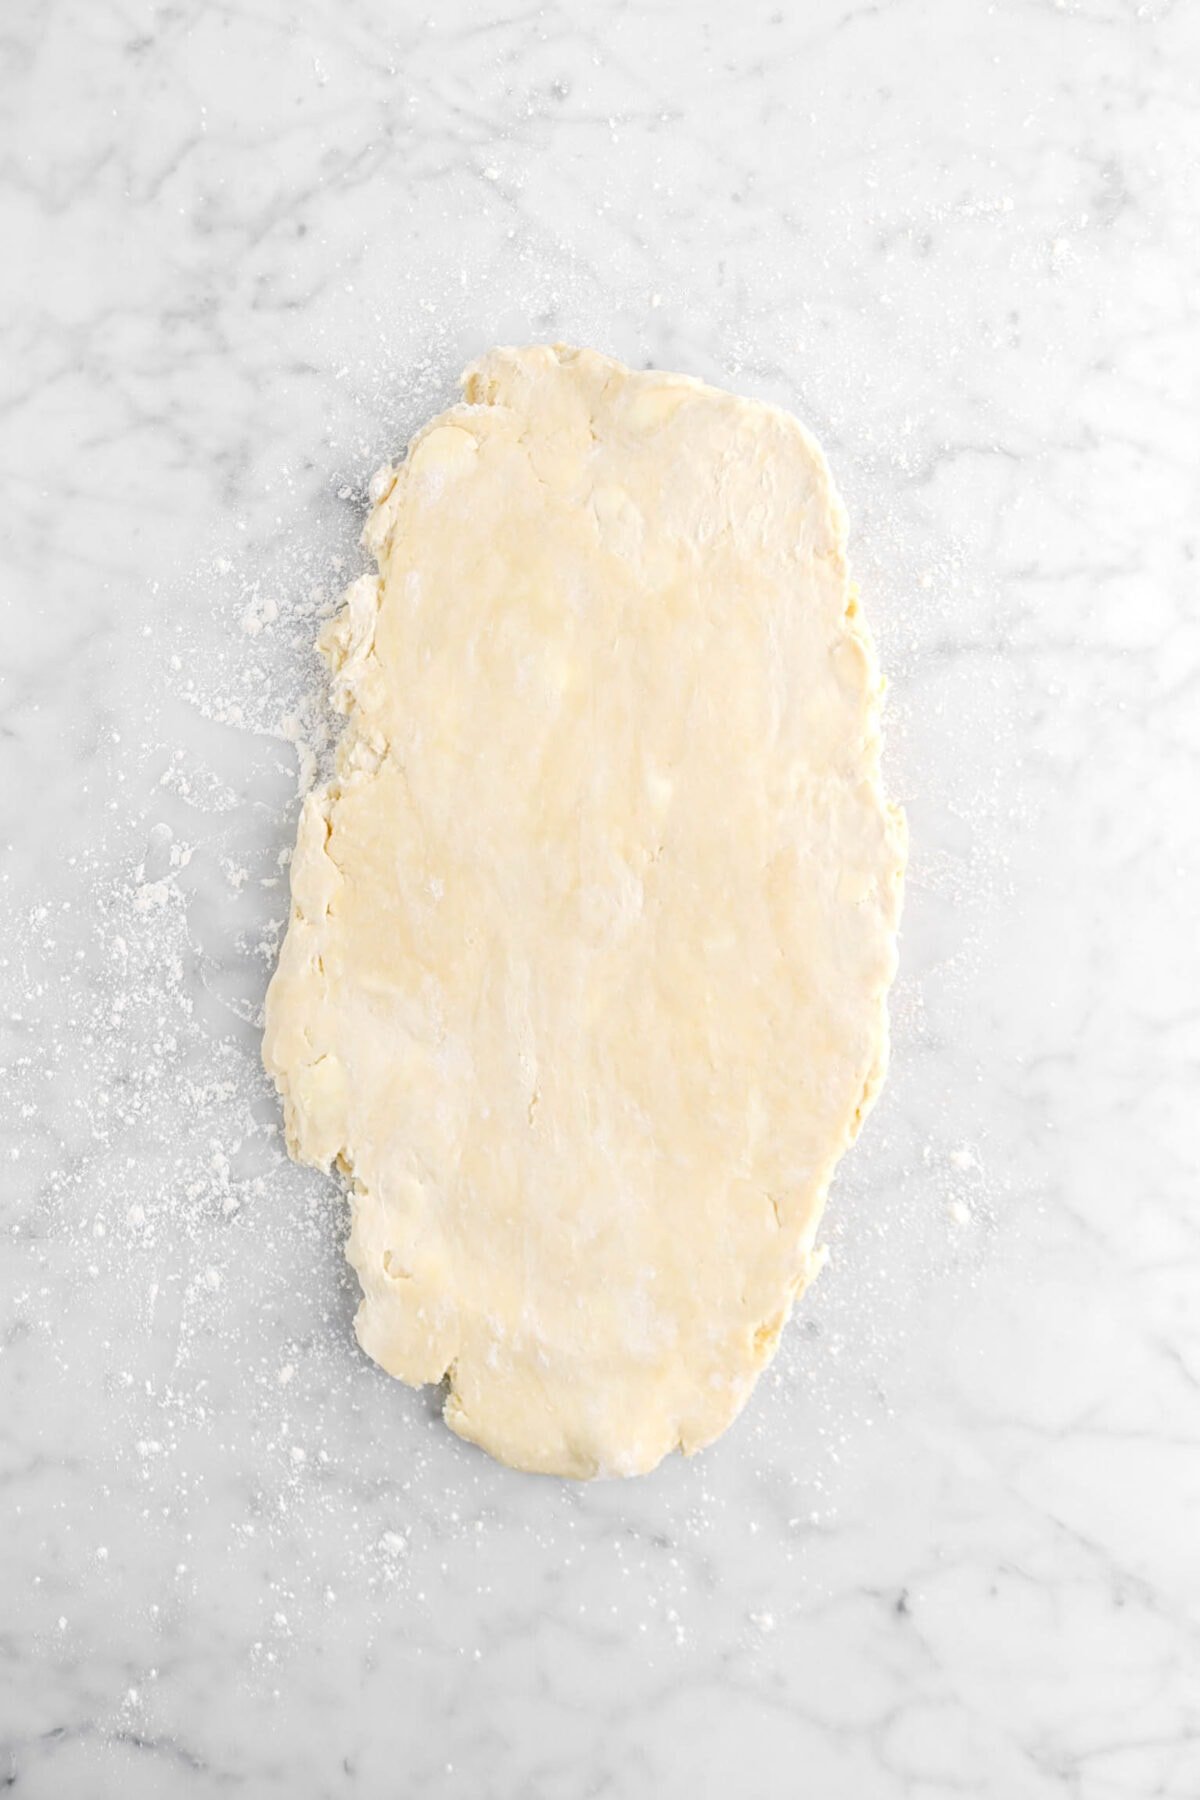 puff pastry dough rolled into an oval on marble surface